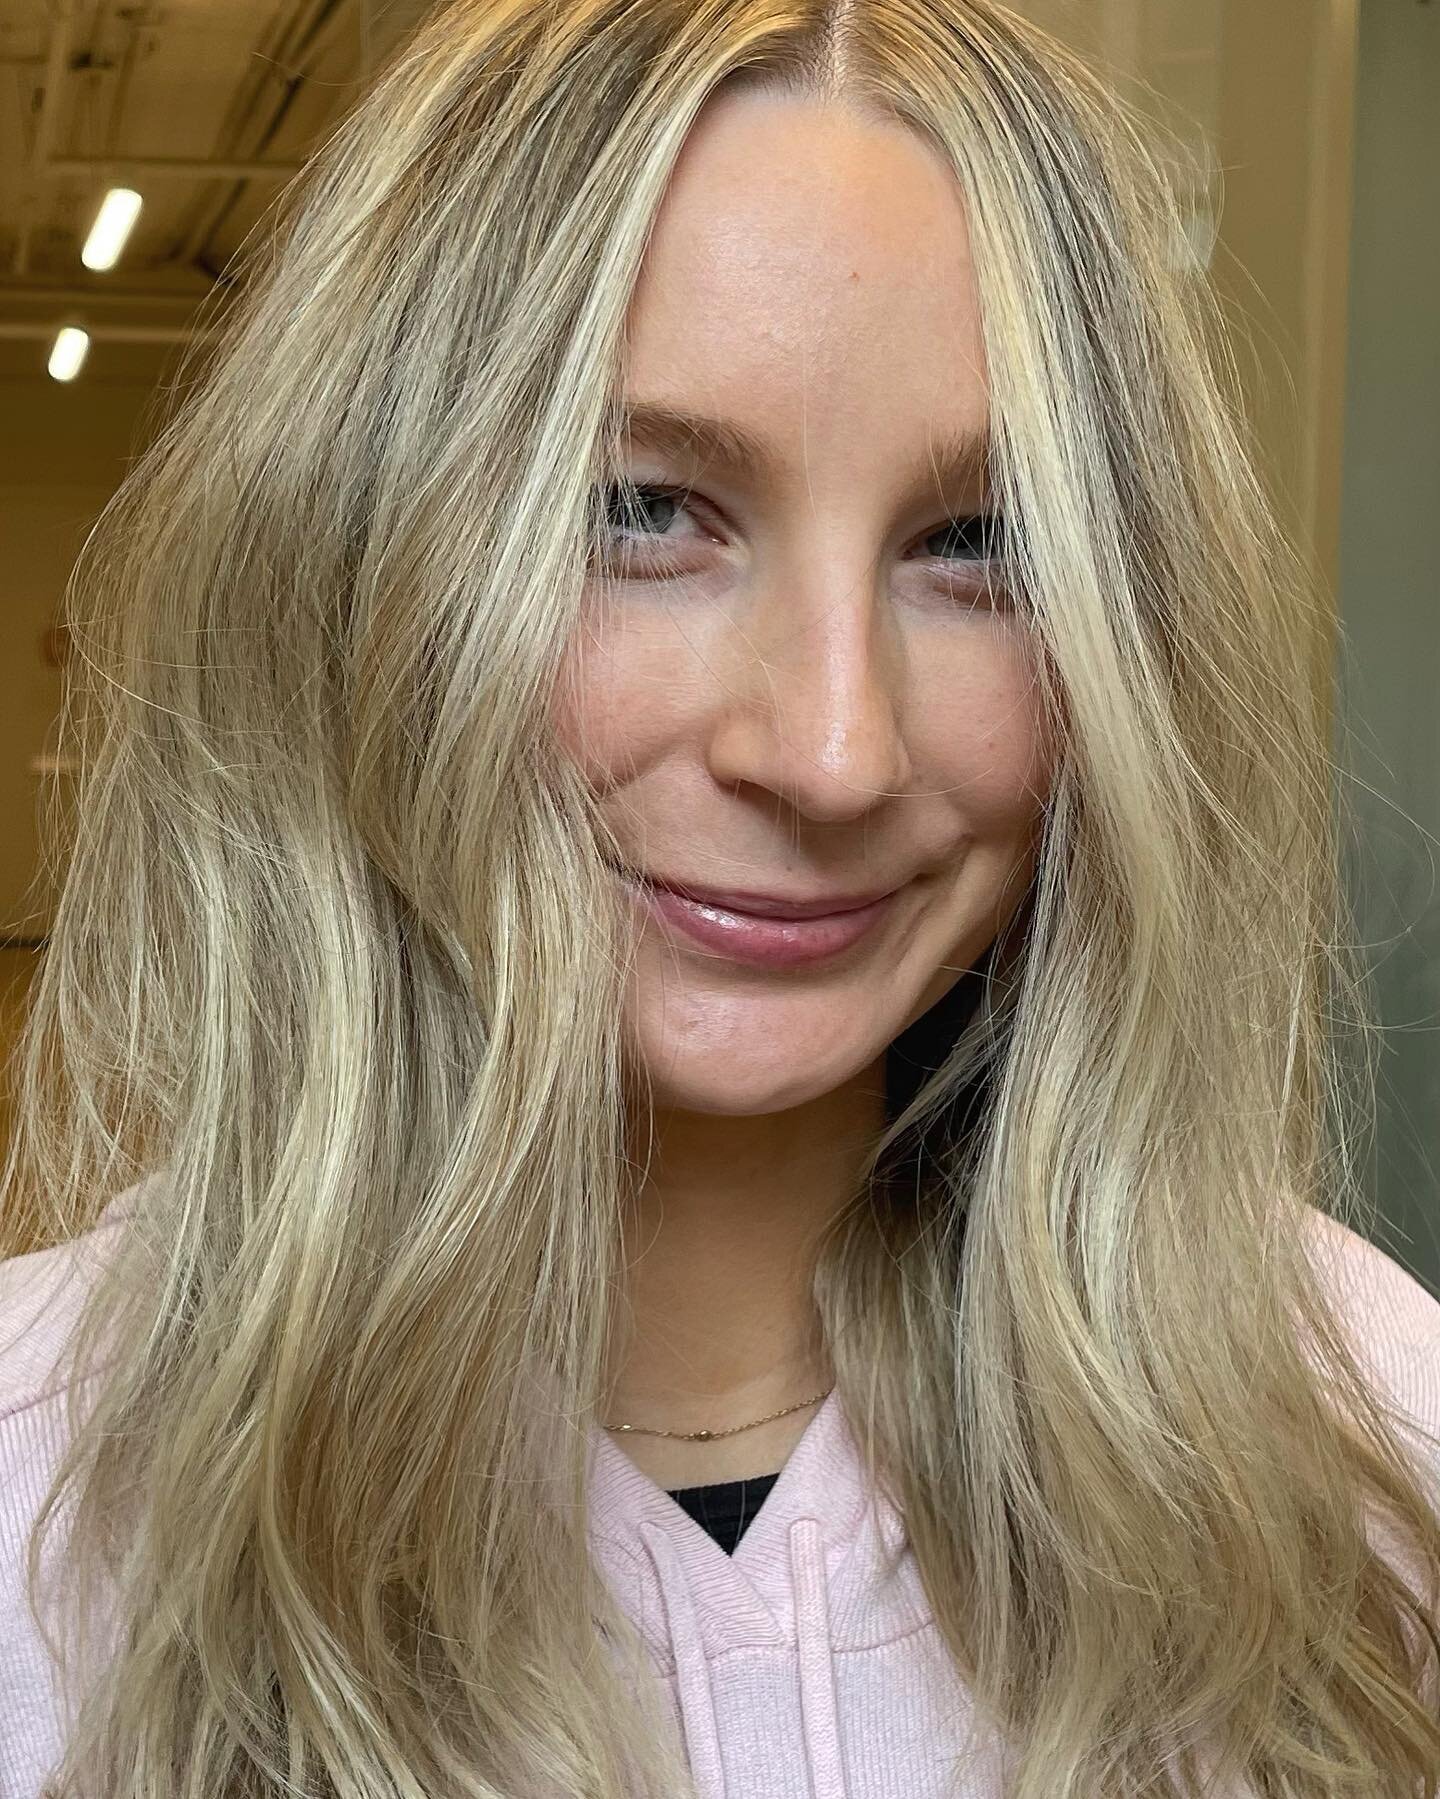 Full highlight💫#color and #style by @tracydaviss #hair #haircolor #hairstyle #highlights #babylights #balayage #foilayage #hairpainting #blonde #blondehair #blondebalayage #blondehighlights #faceframing #sunkissed #loosewave #clientselfie #redken #o